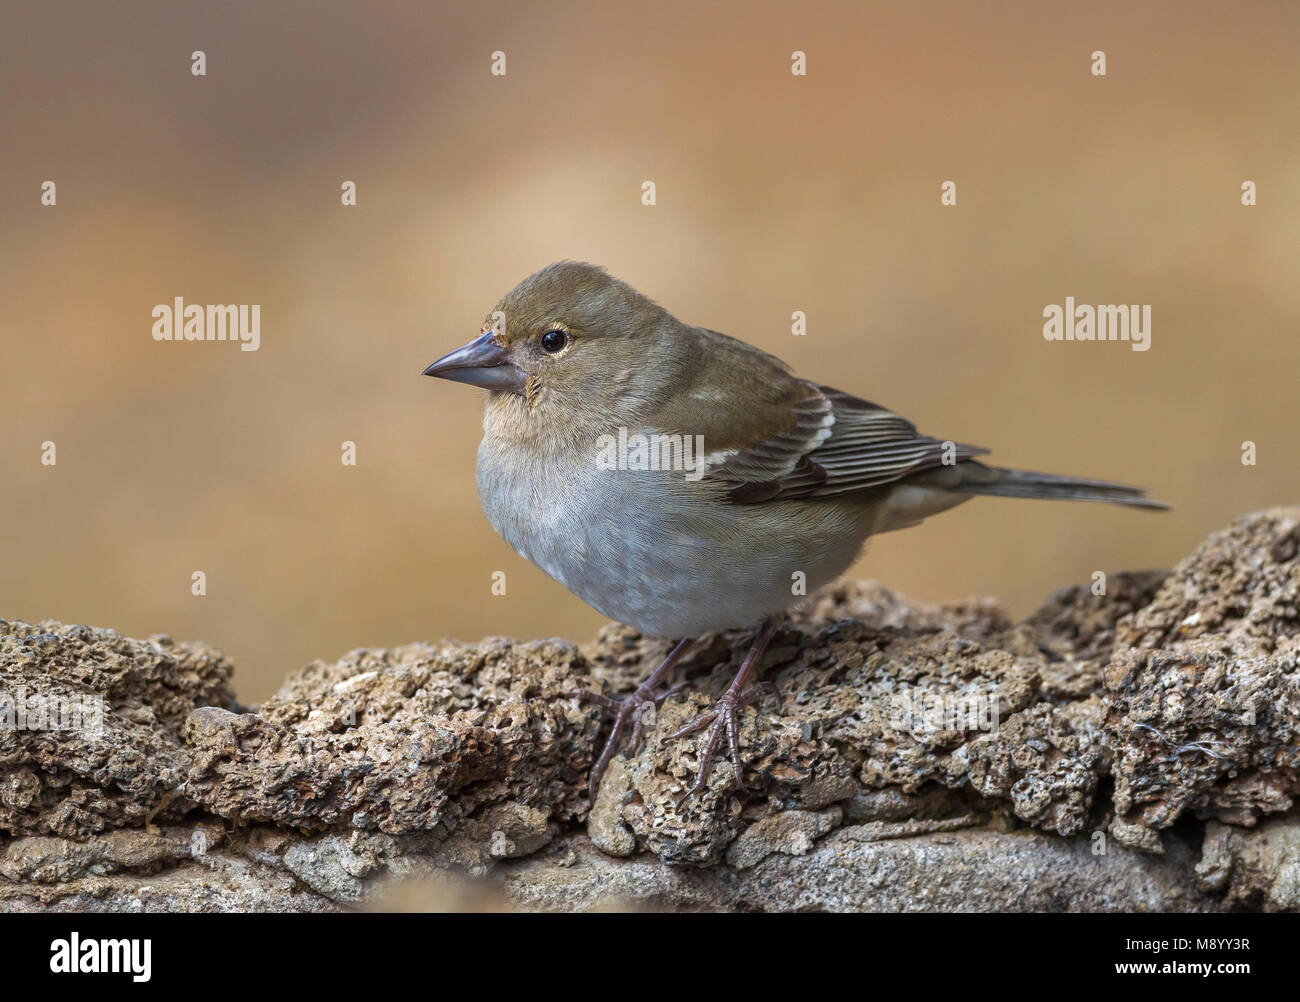 Blue Chaffinch at Merendero De Chio picnic area near Teyde, Tenerife, Canary Islands Stock Photo